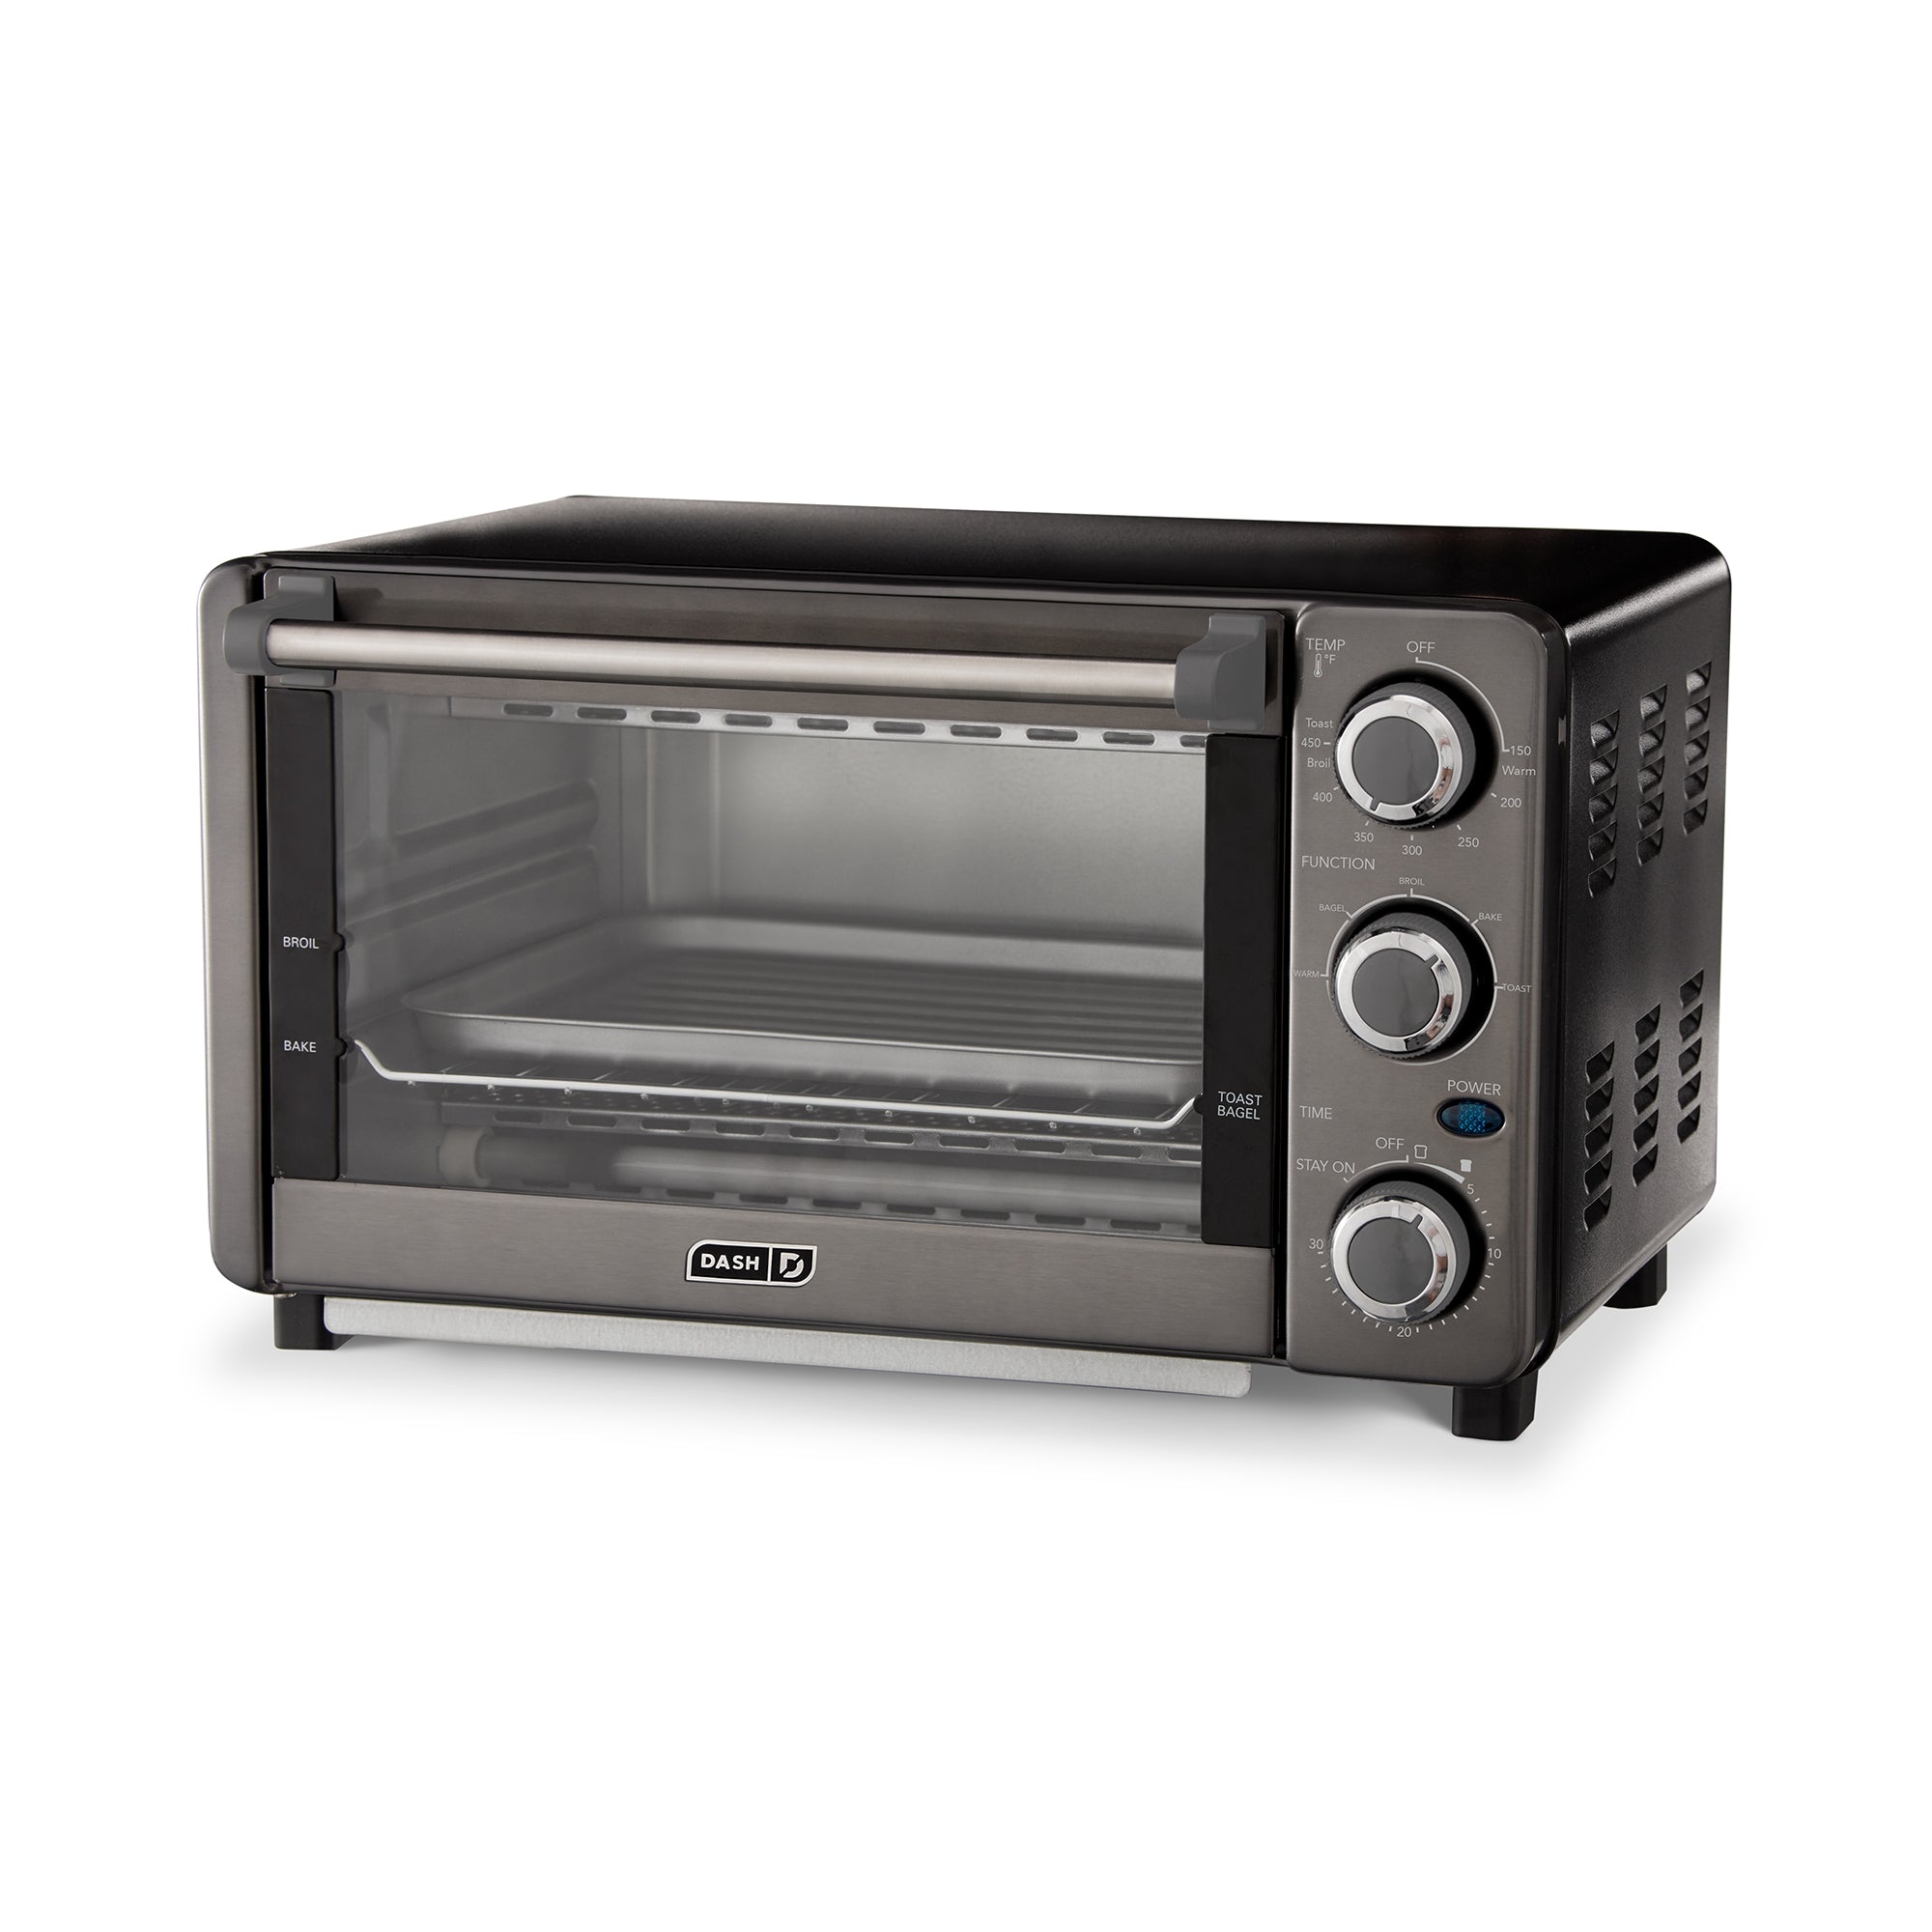 DASH Mini Toaster Oven Cooker, with Baking Tray, Rack, Auto Shut Off Yellow  new